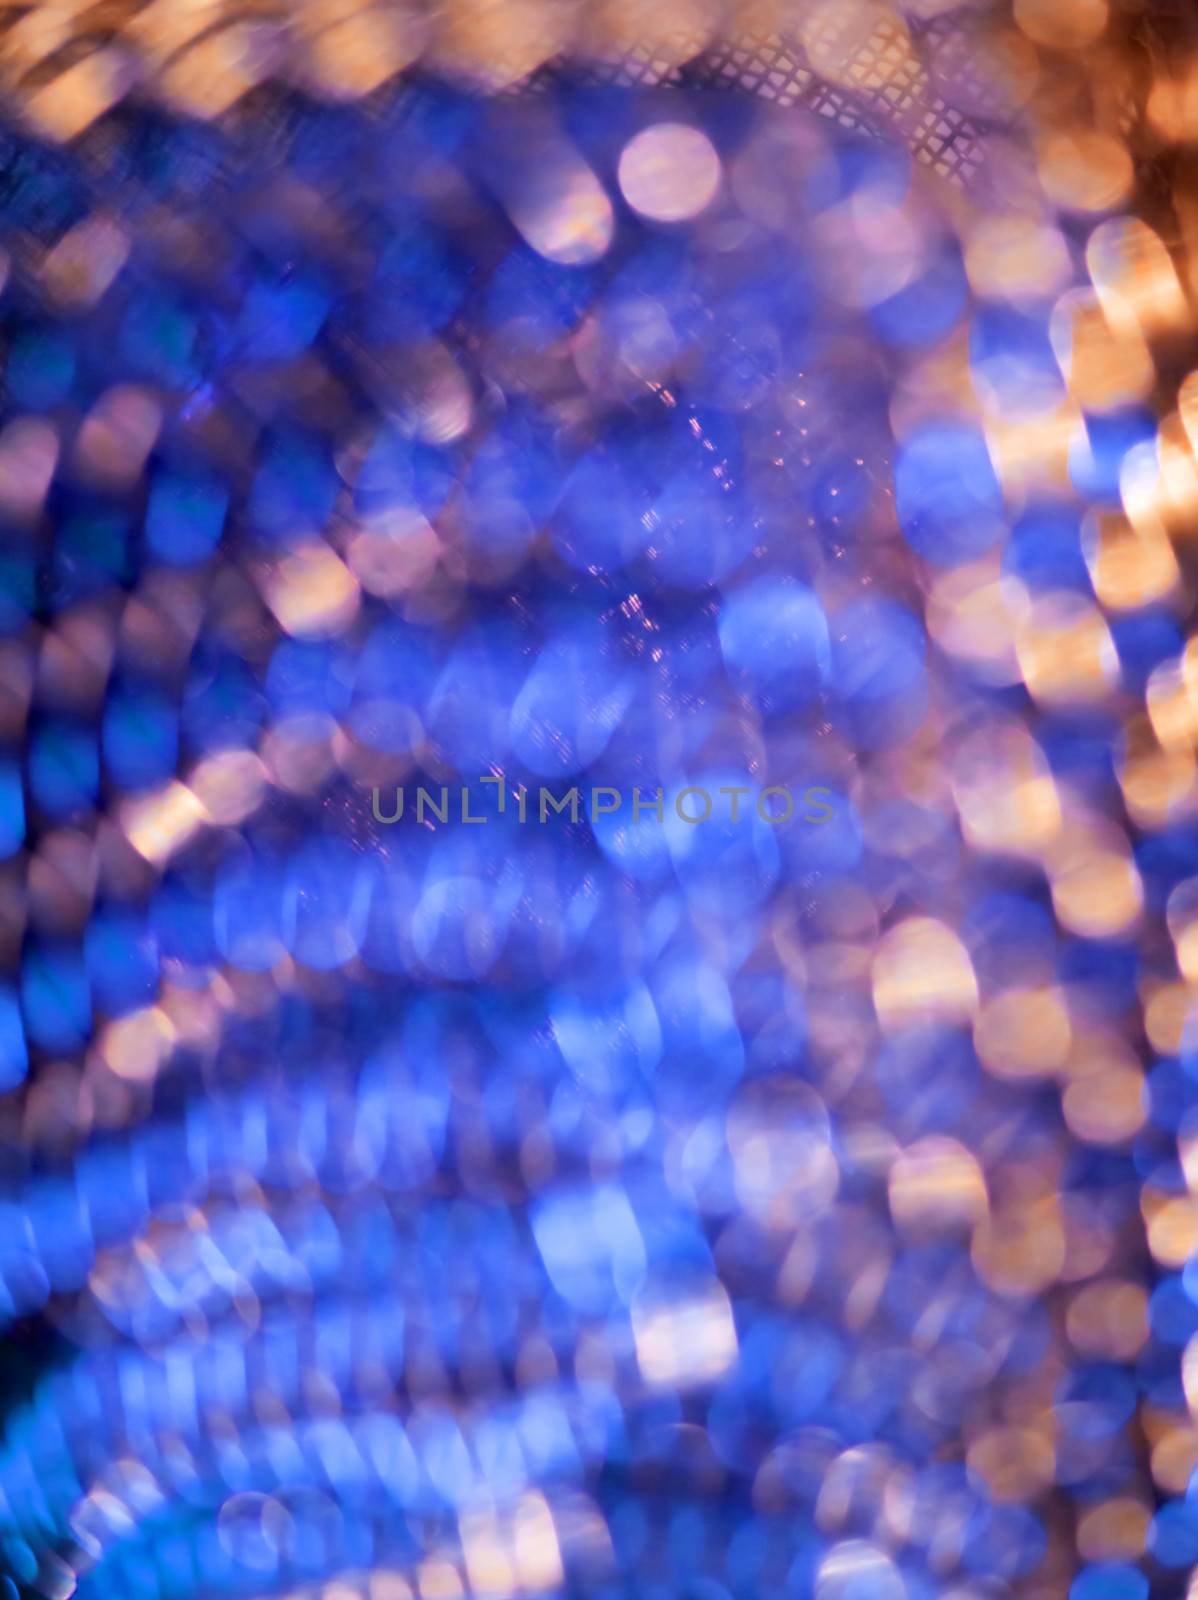 Abstract blurred background image of a microphone closeup.
